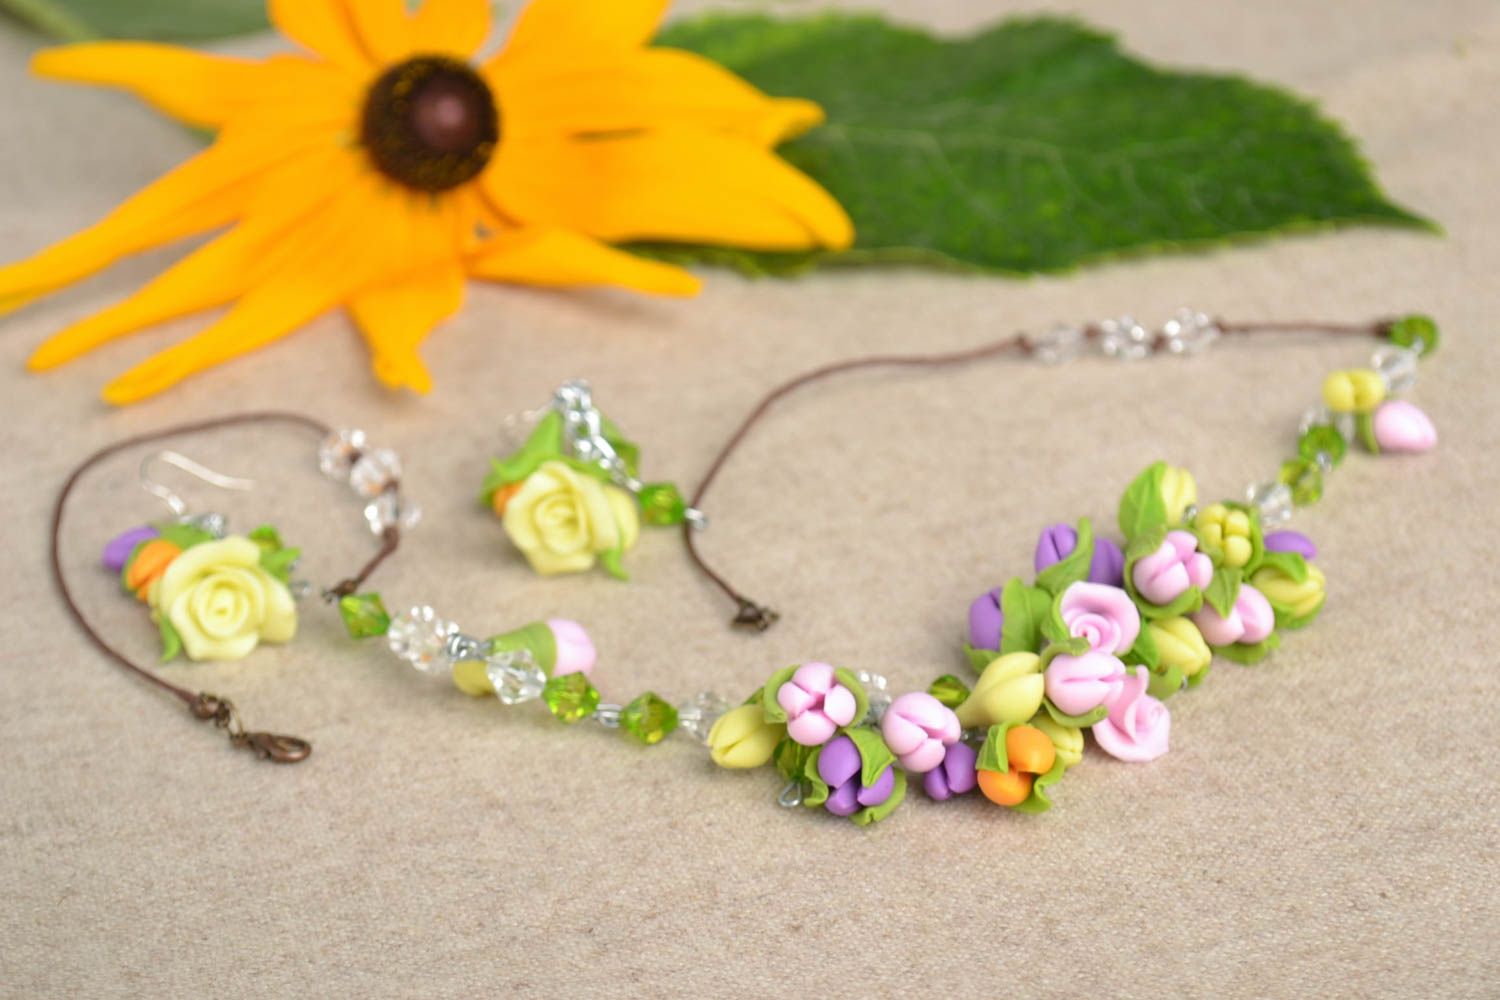 Handmade earrings and necklace with flowers designer floral bijouterie set photo 1